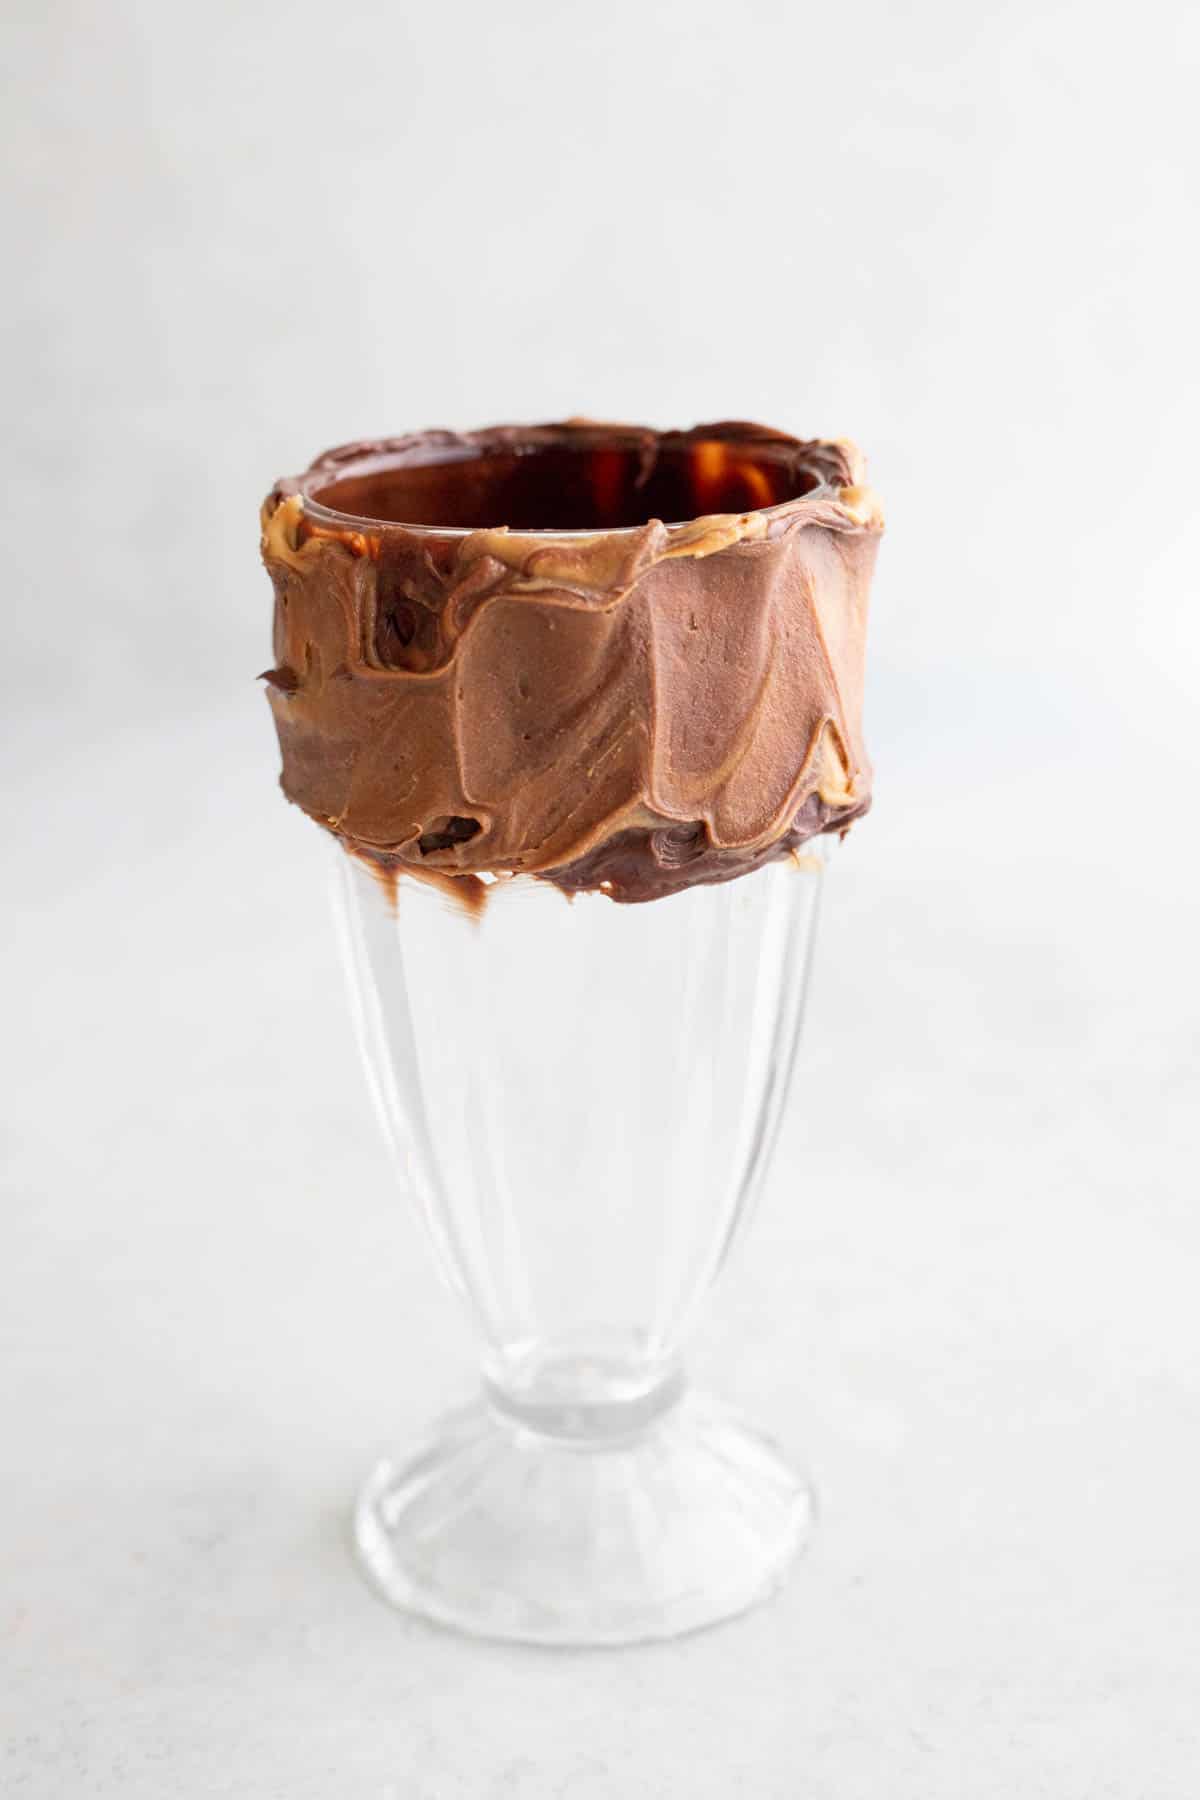 A milkshake glass with a frosted peanut butter rim.